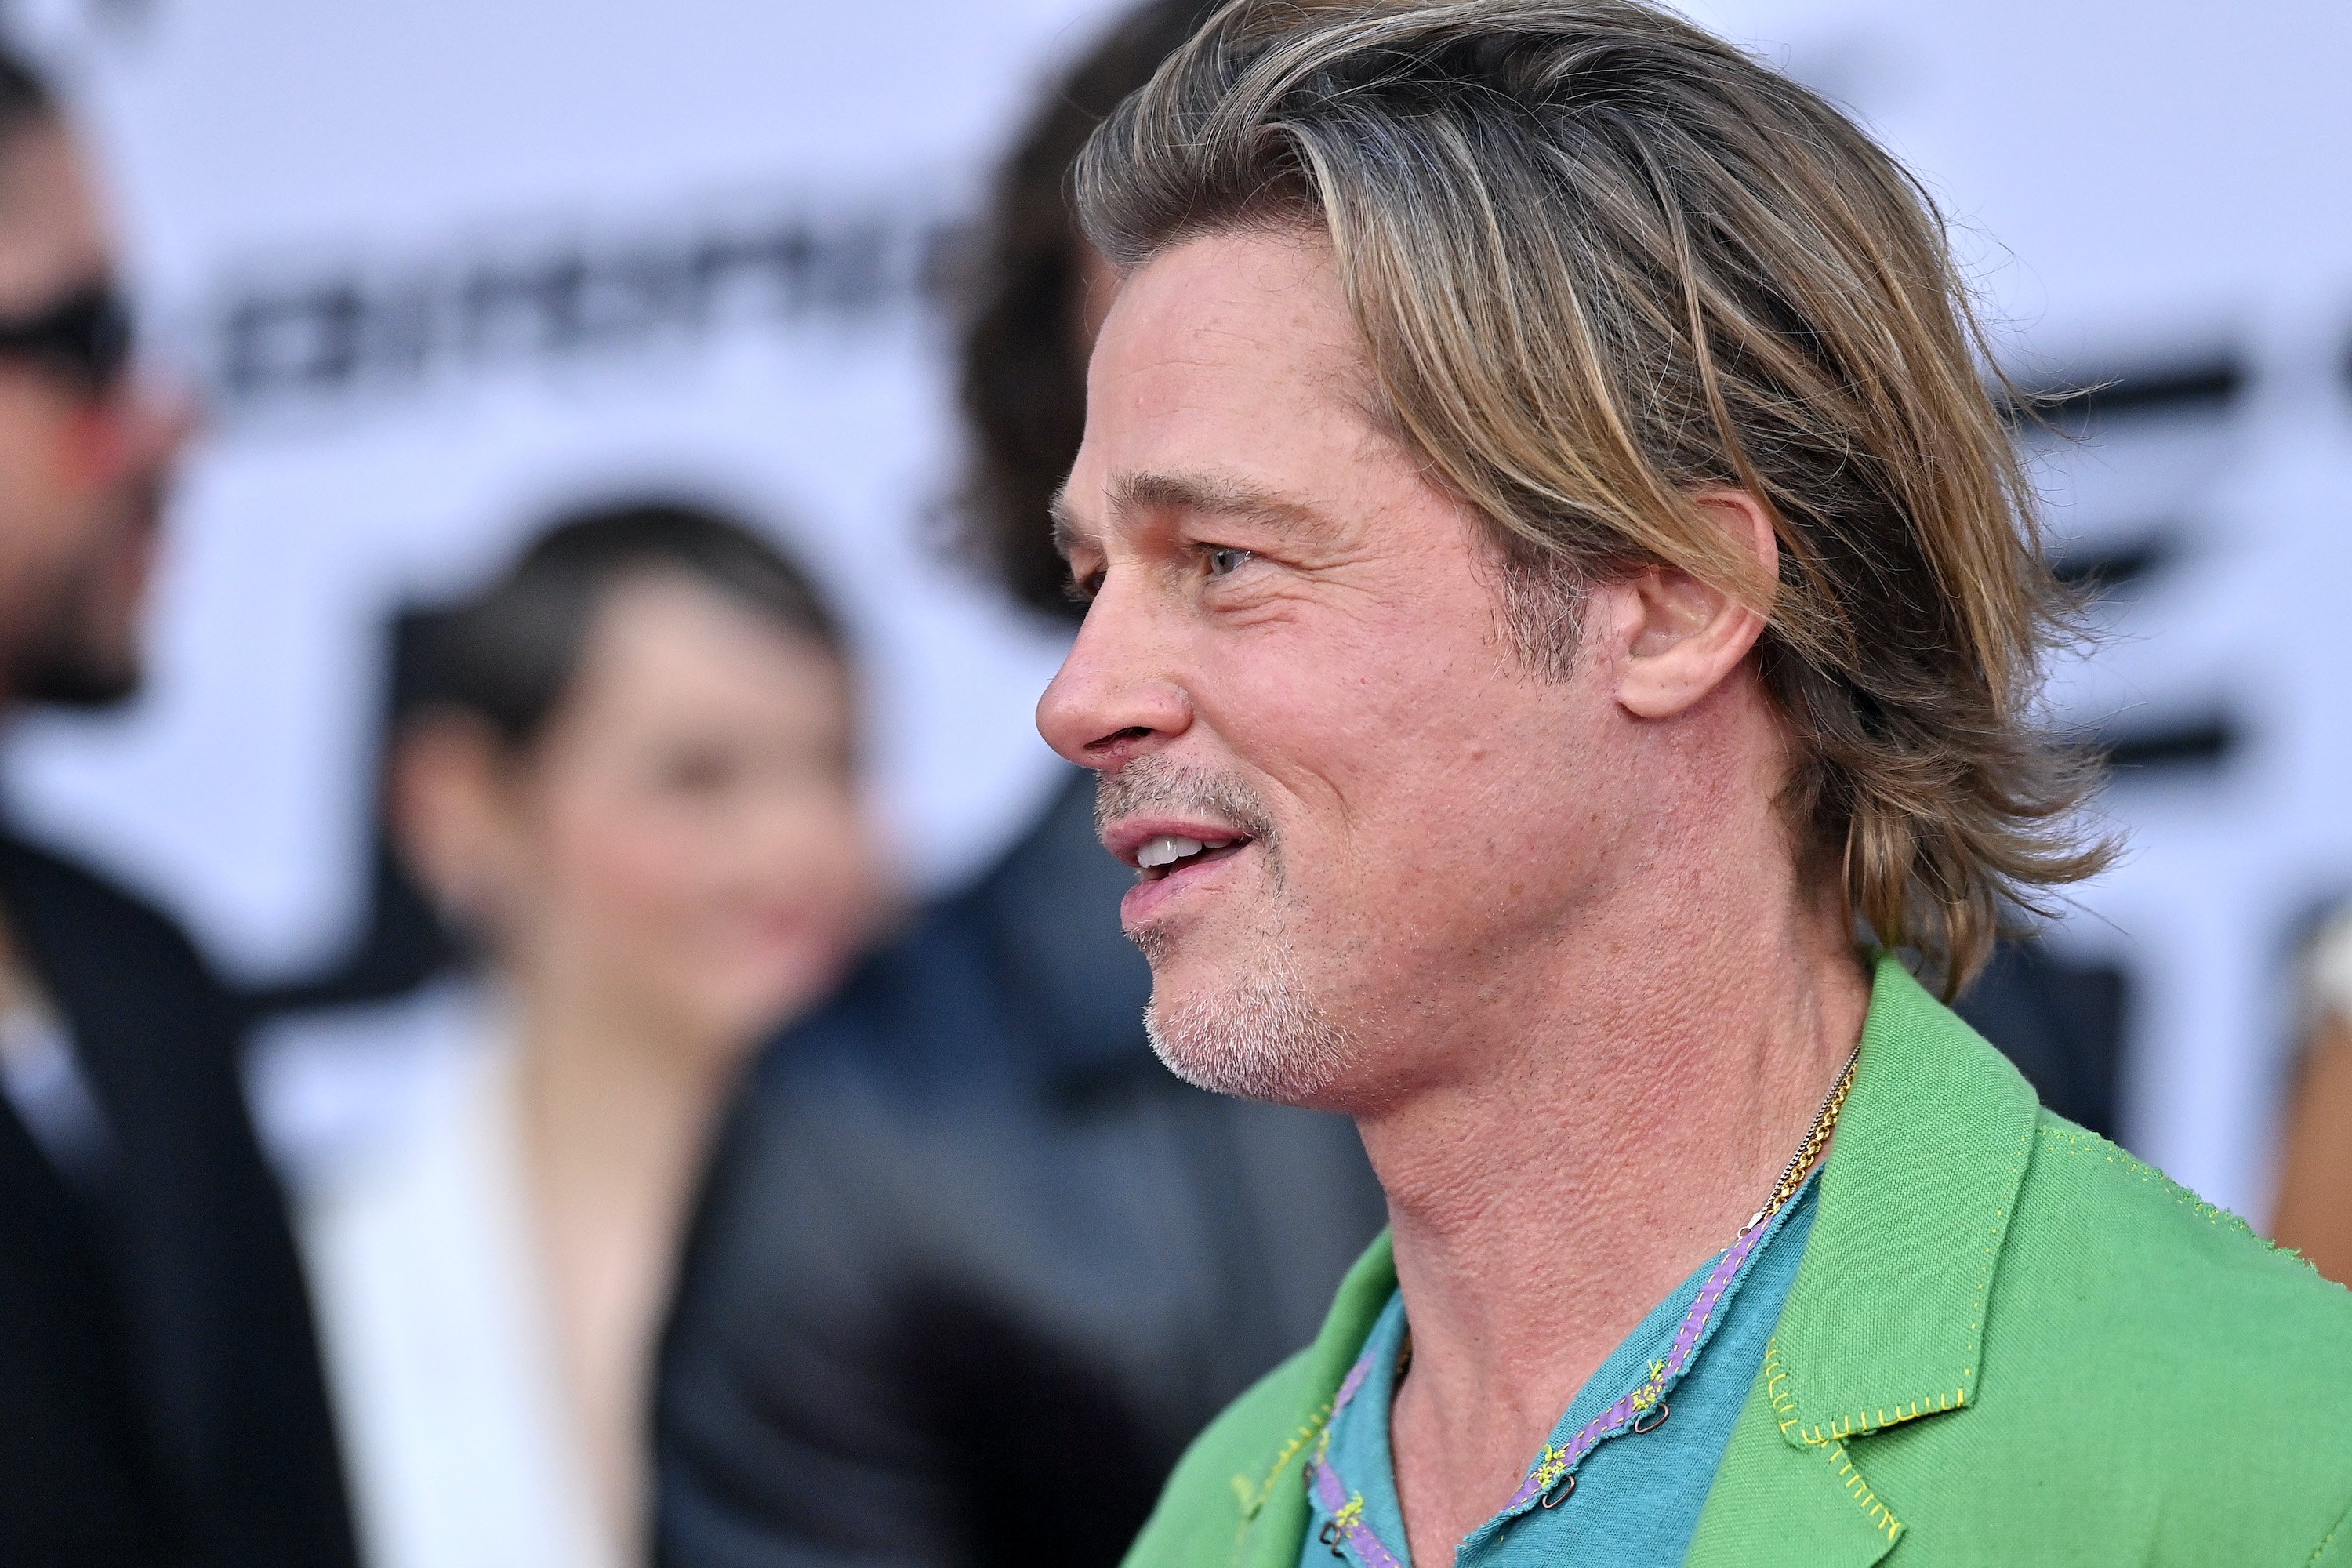 Actor Brad Pitt attends the Los Angeles premiere of Bullet Train